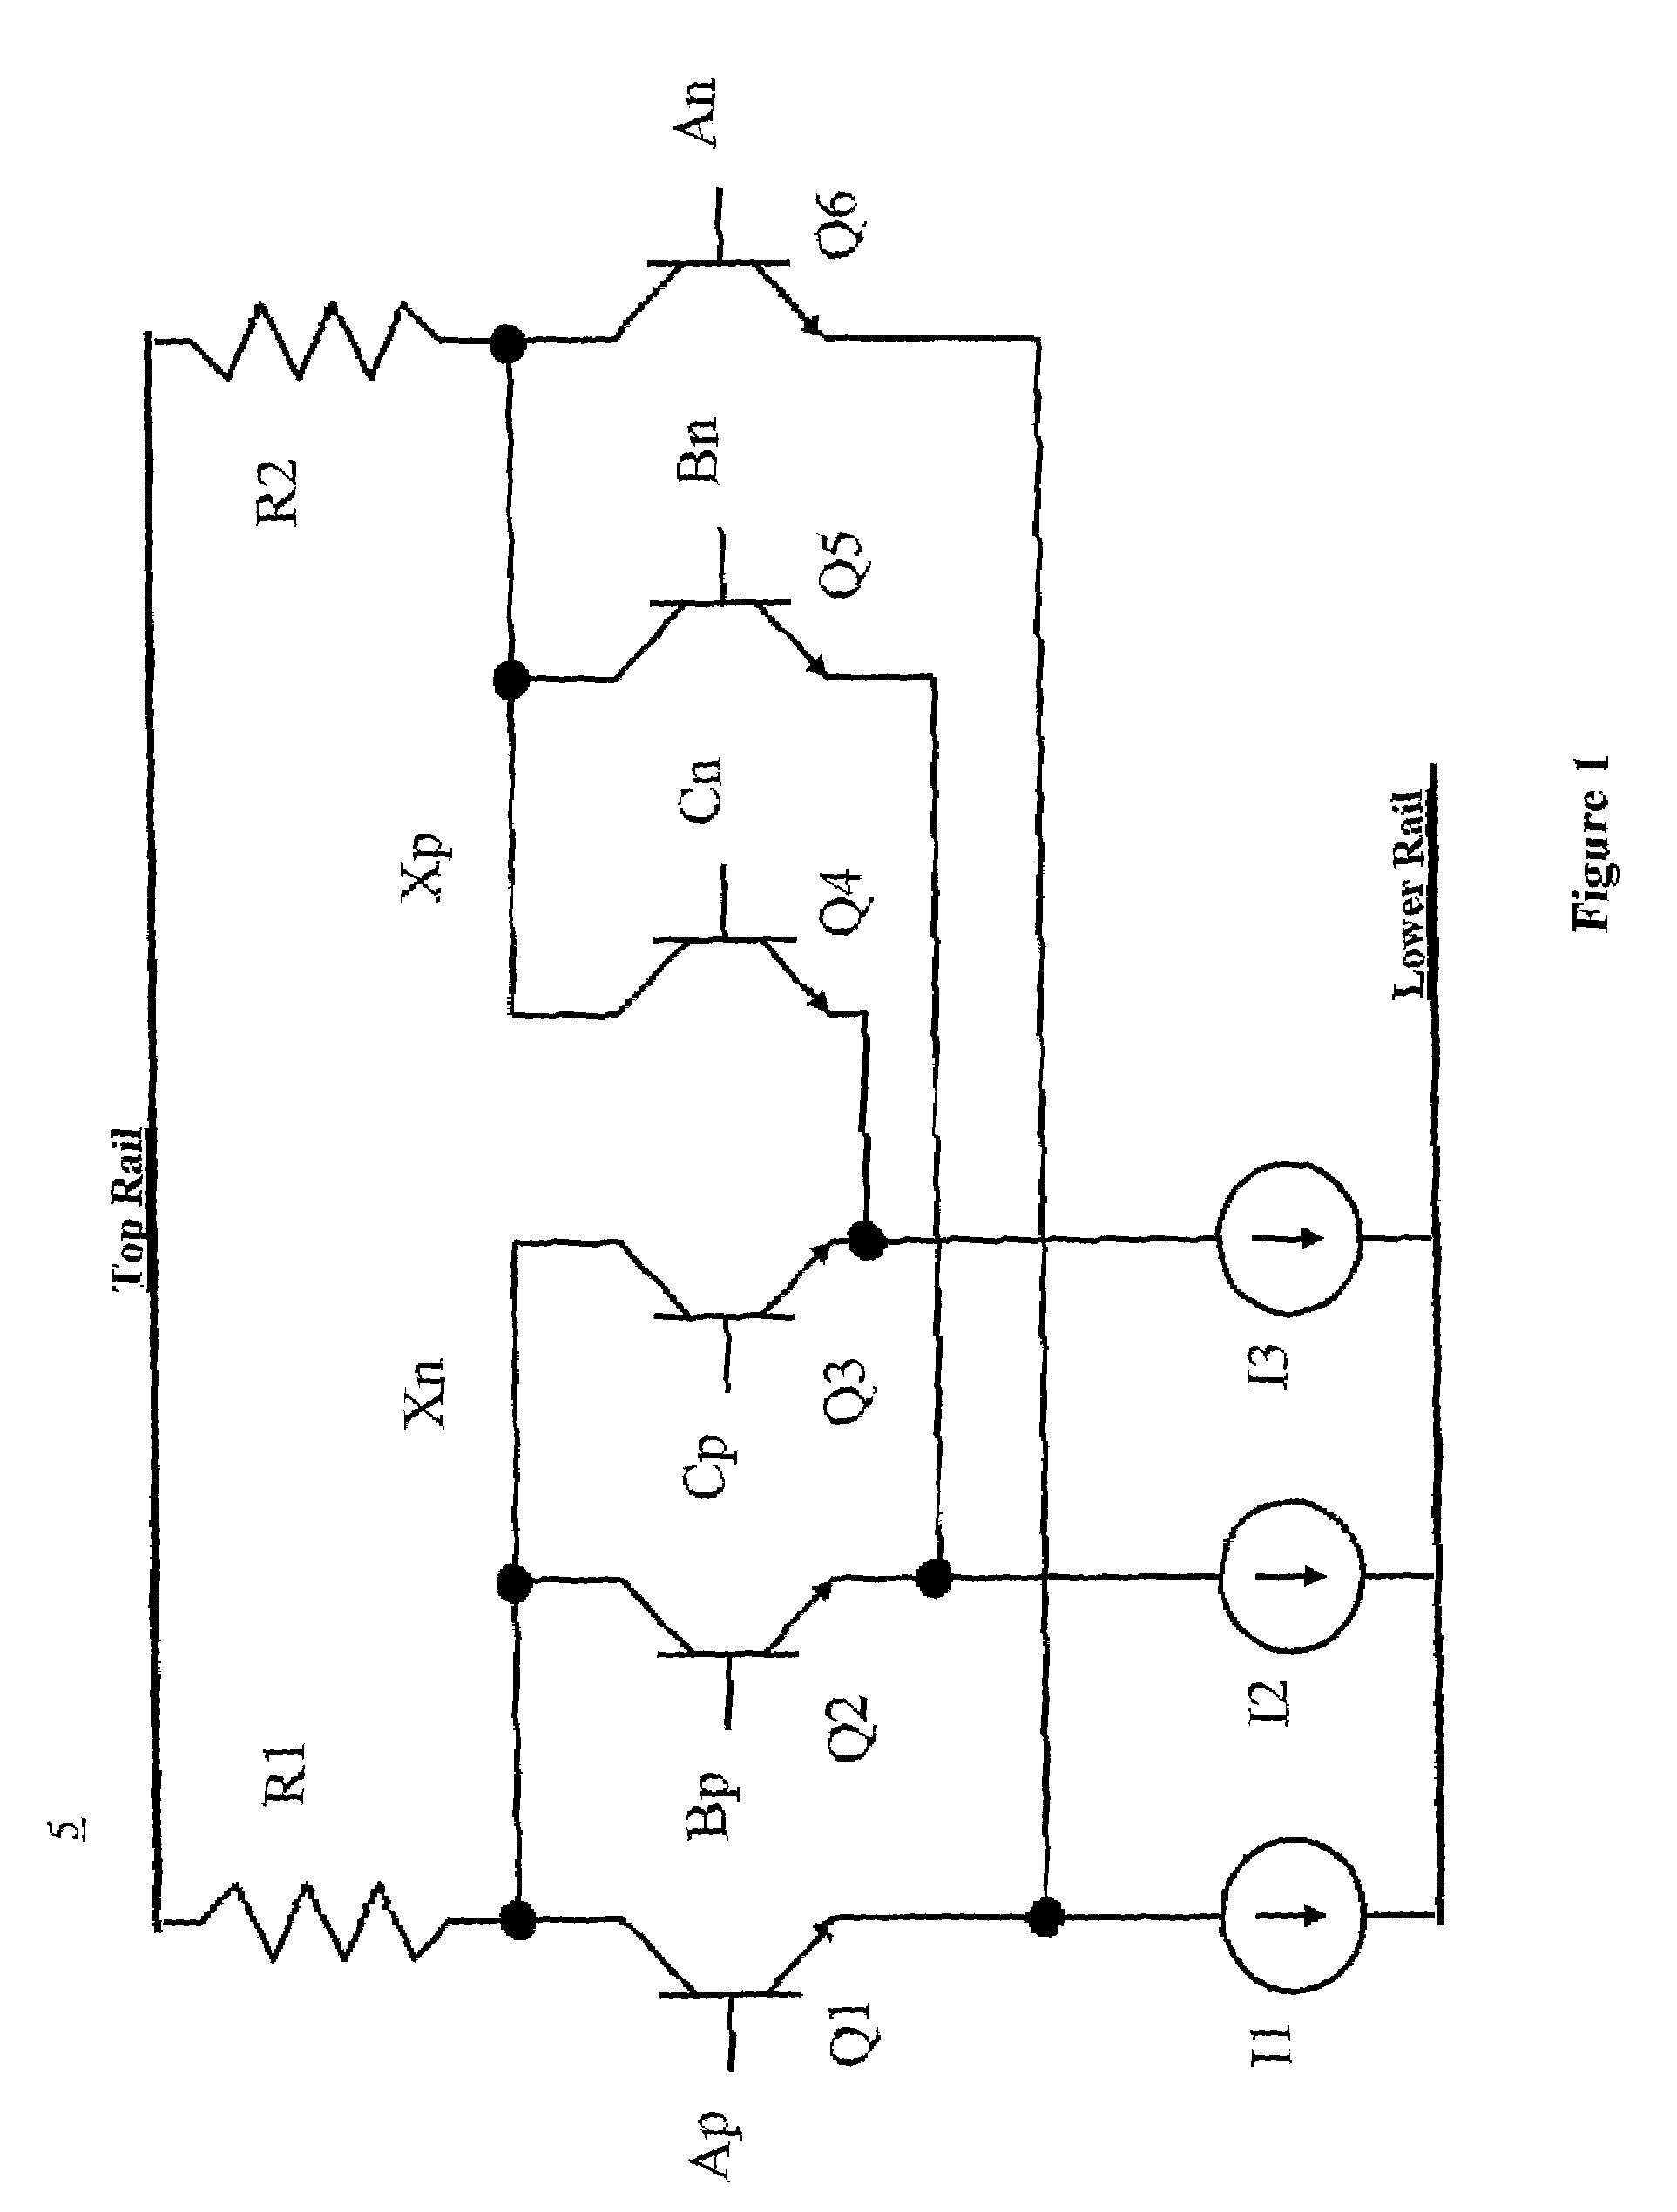 Single-level parallel-gated carry/majority circuits and systems therefrom